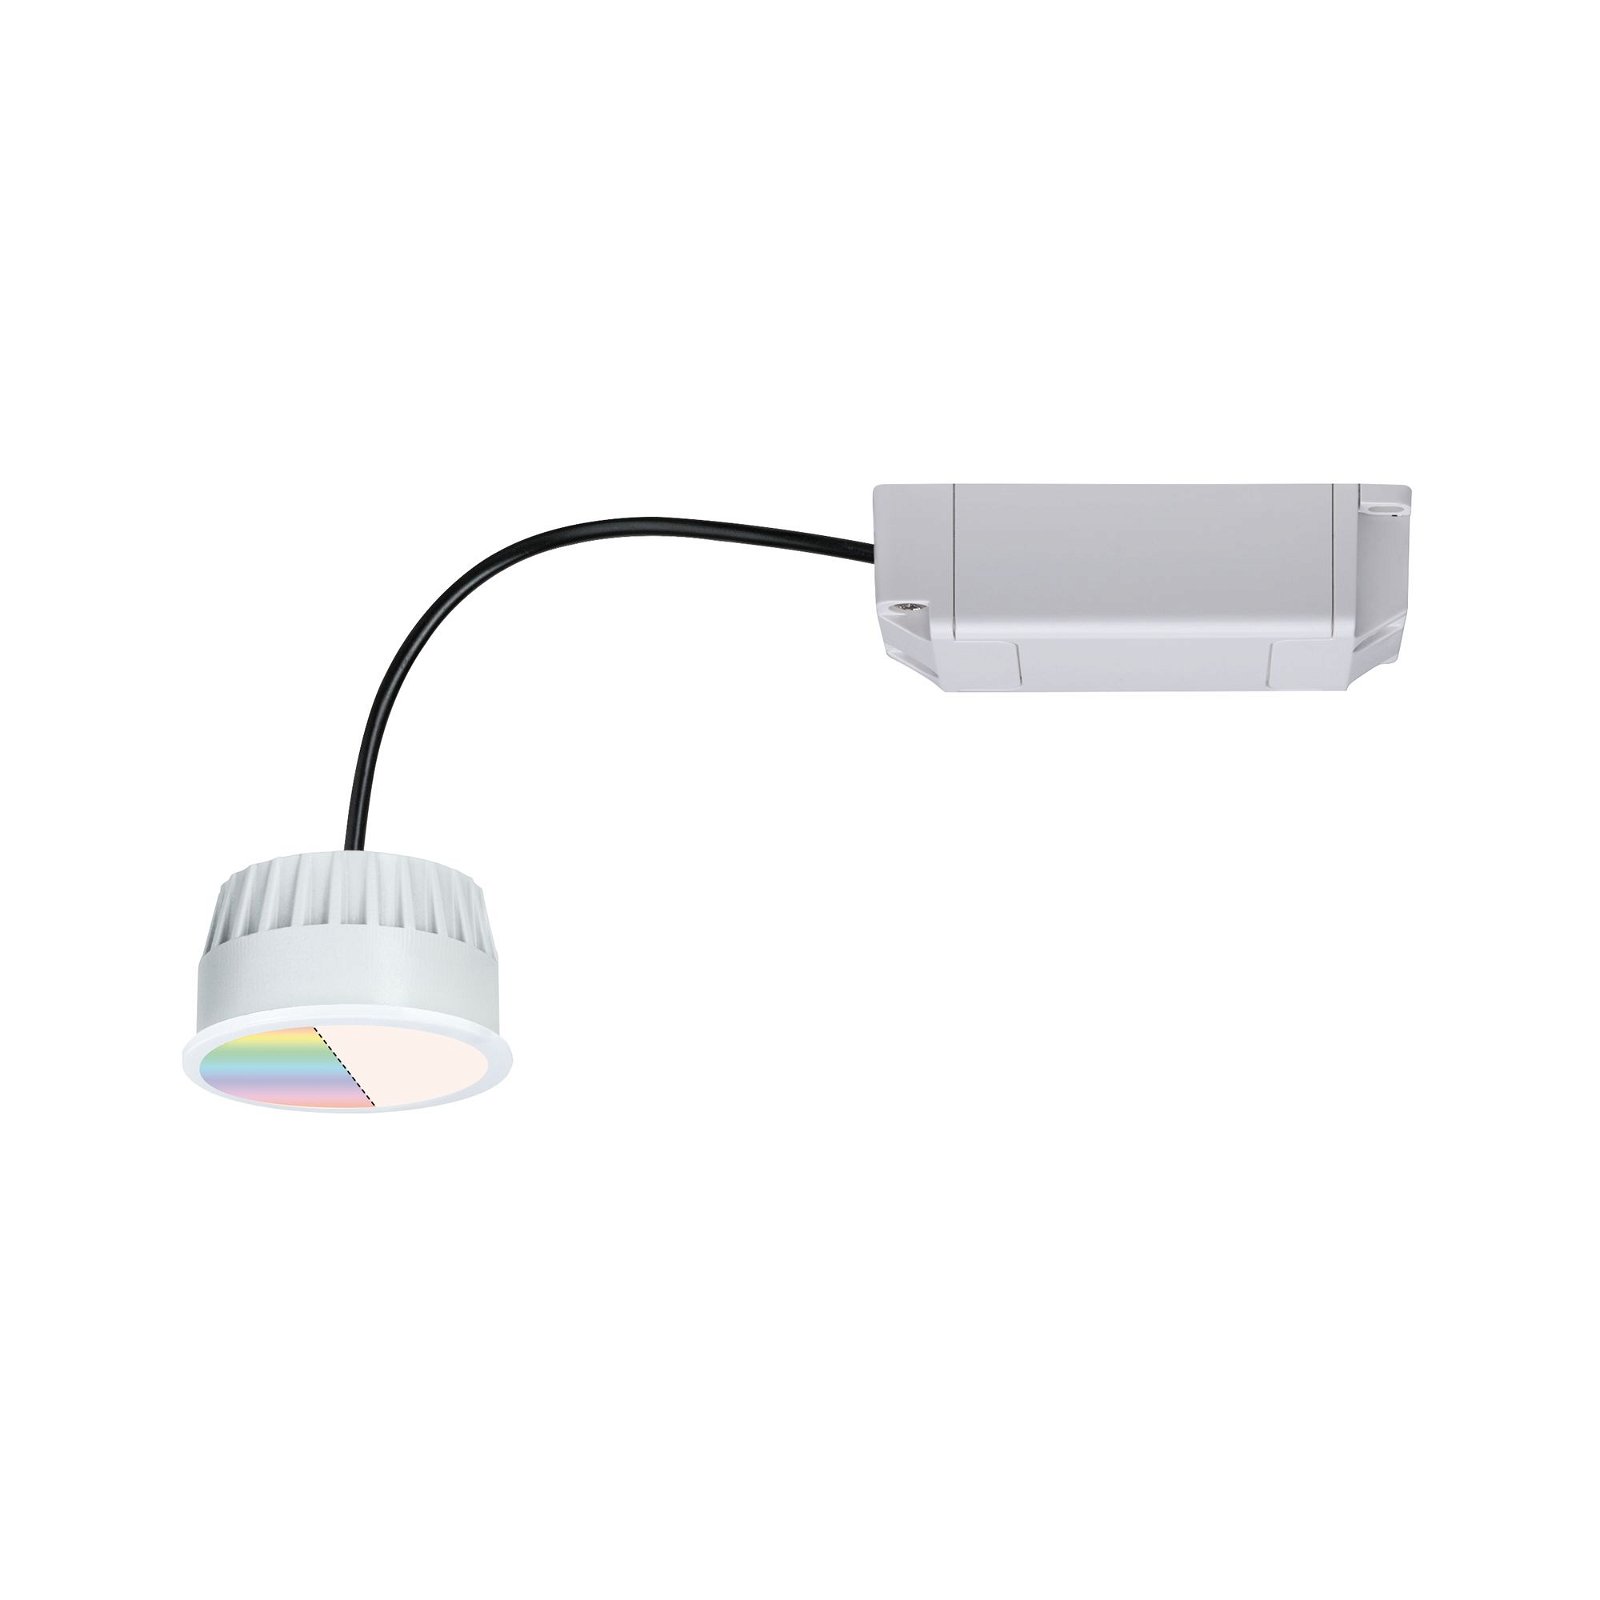 LED Module recessed luminaire Smart Home Zigbee RGBW Coin round 50mm Coin 5,2W 400lm 230V dimmable RGBW Satin